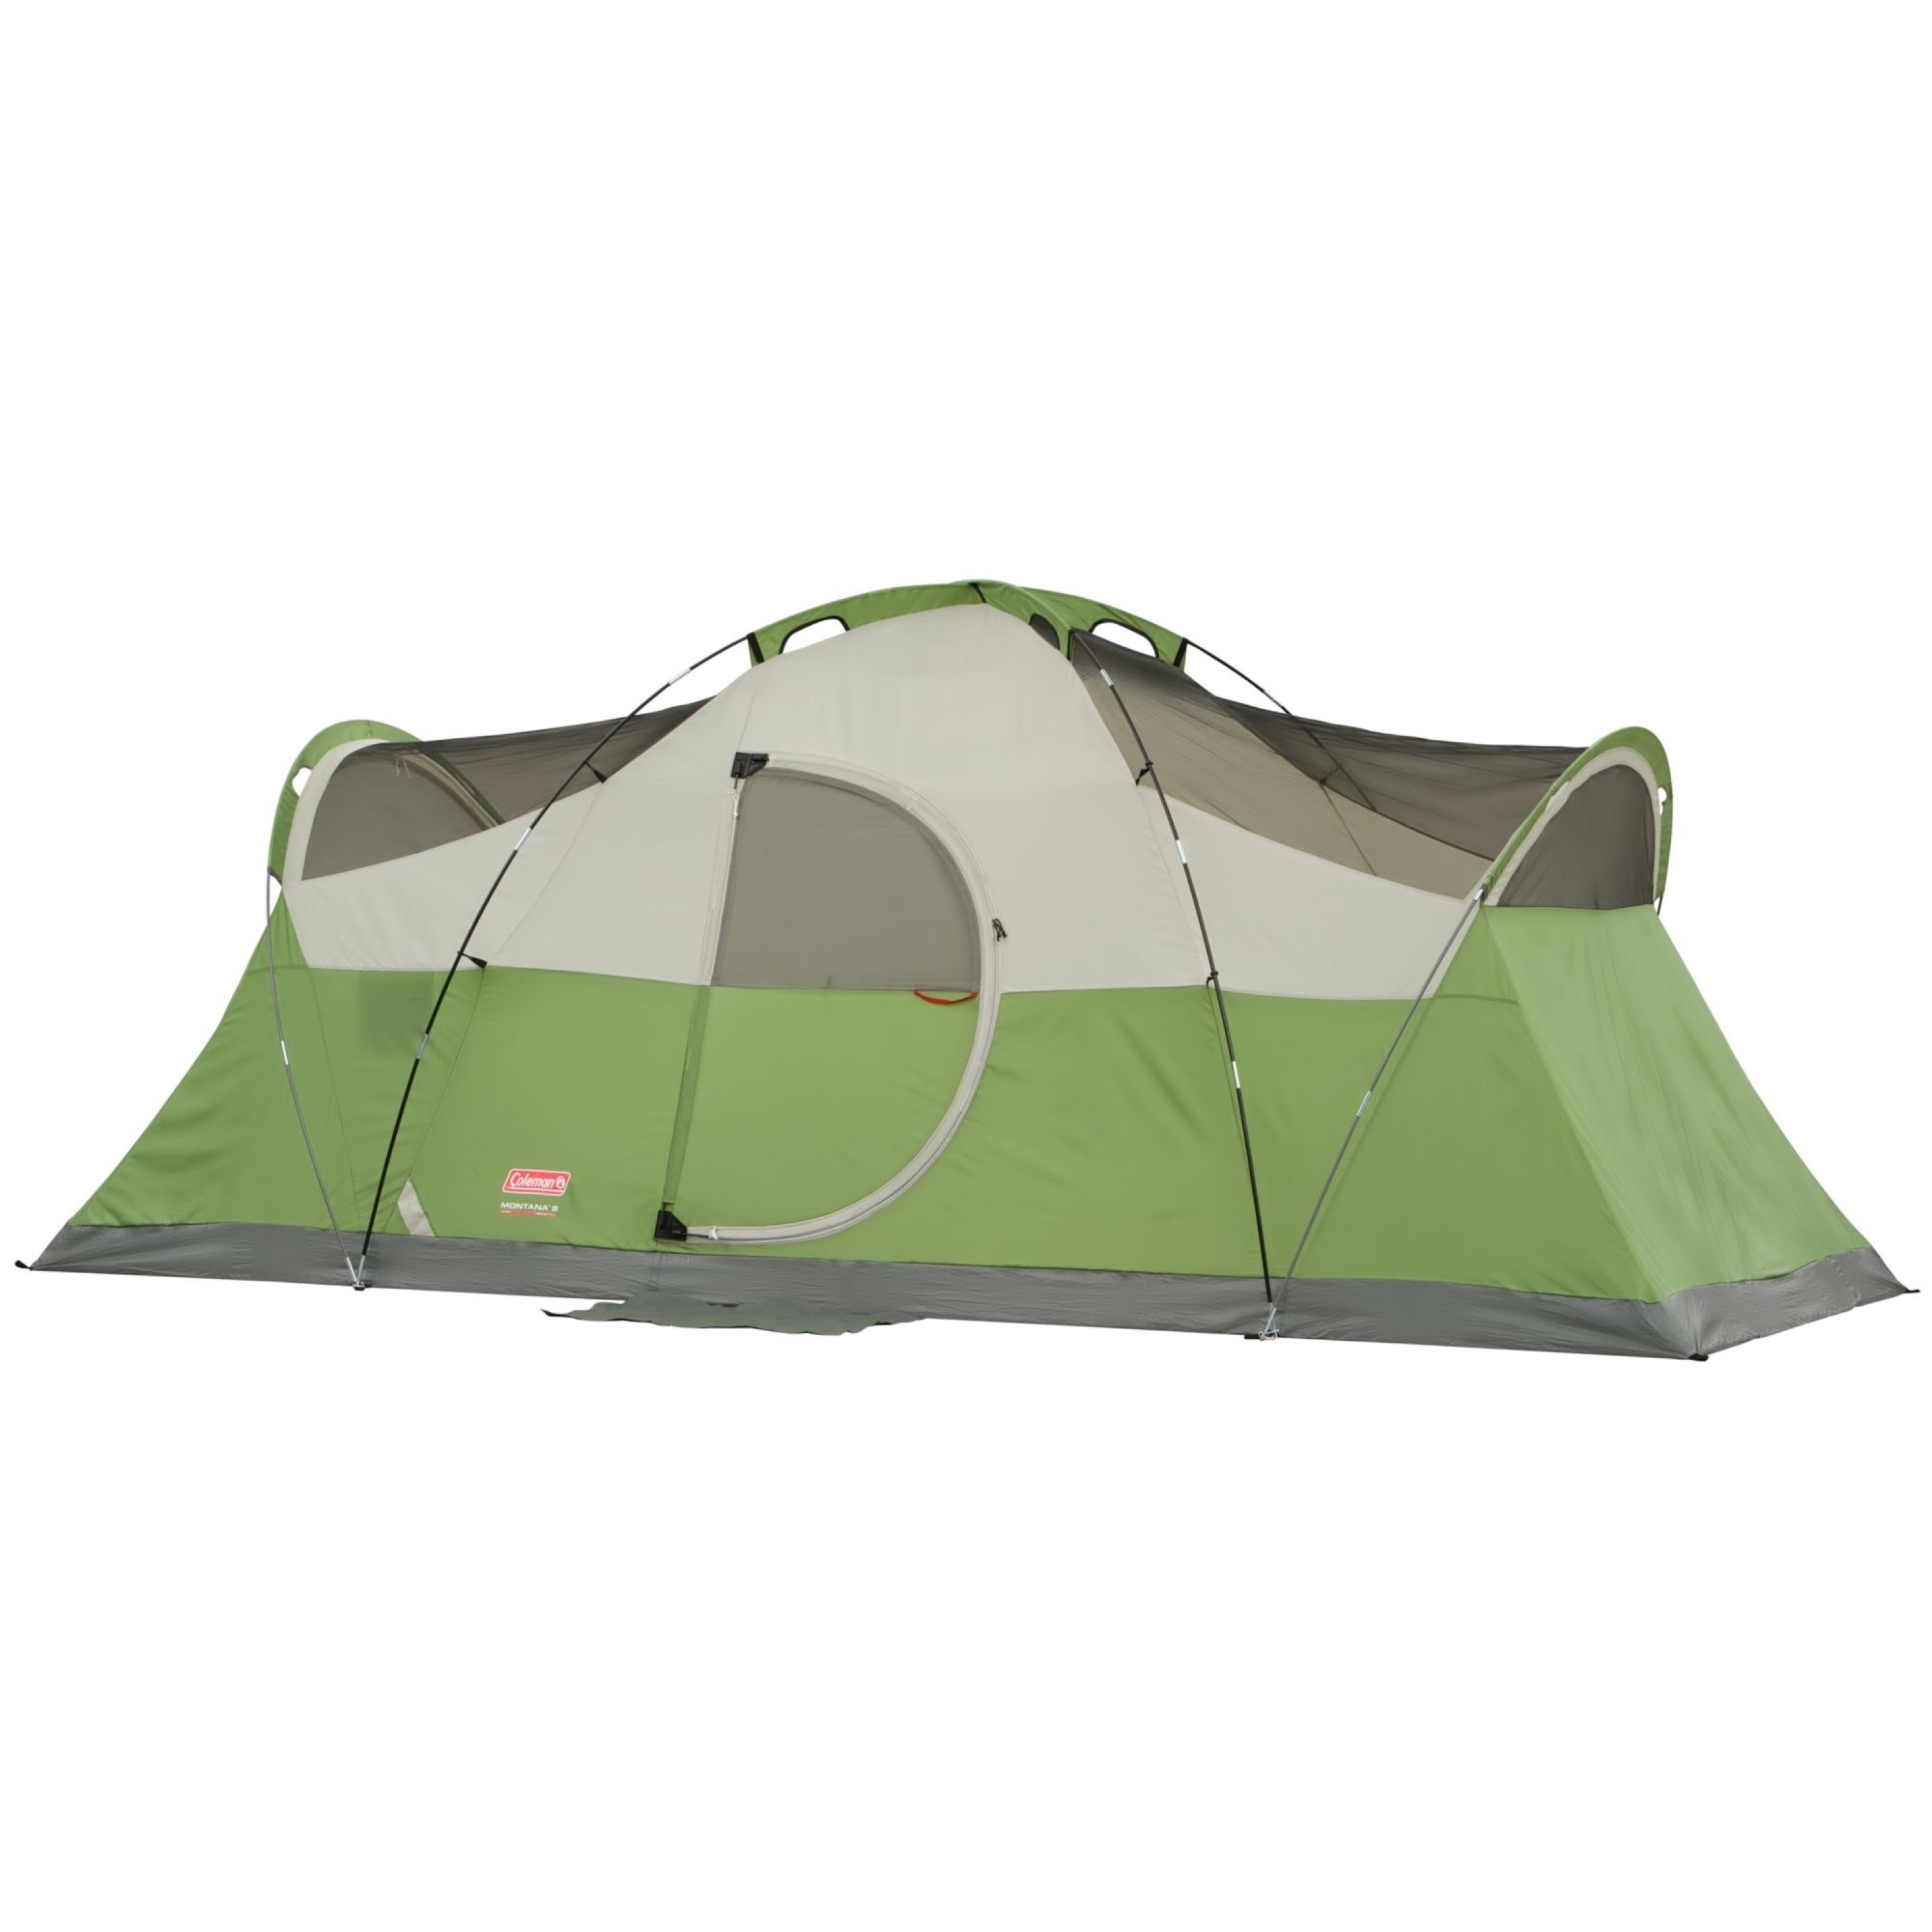 Coleman Montana 8-Person Dome Tent, 1 Room, Green - image 5 of 8